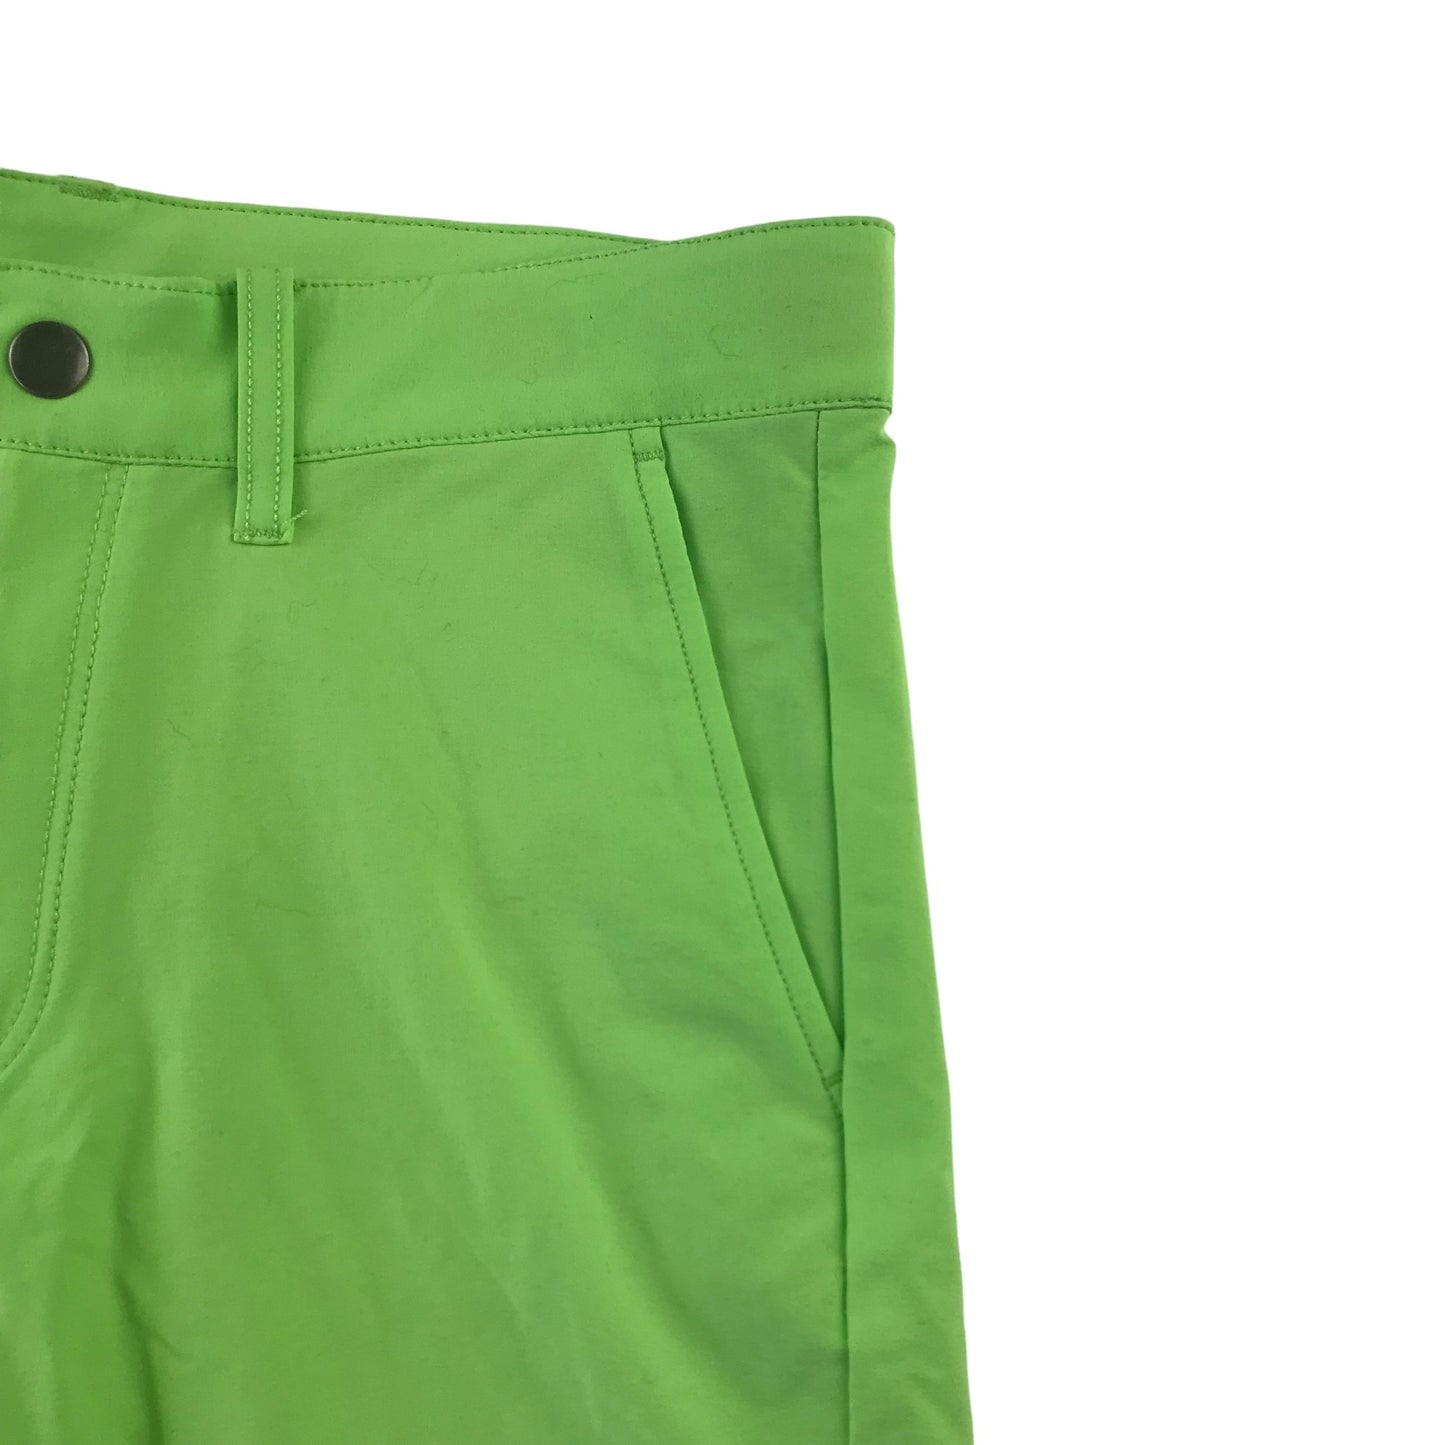 Crewcuts Golf Short Age 10 Lime Chino Style